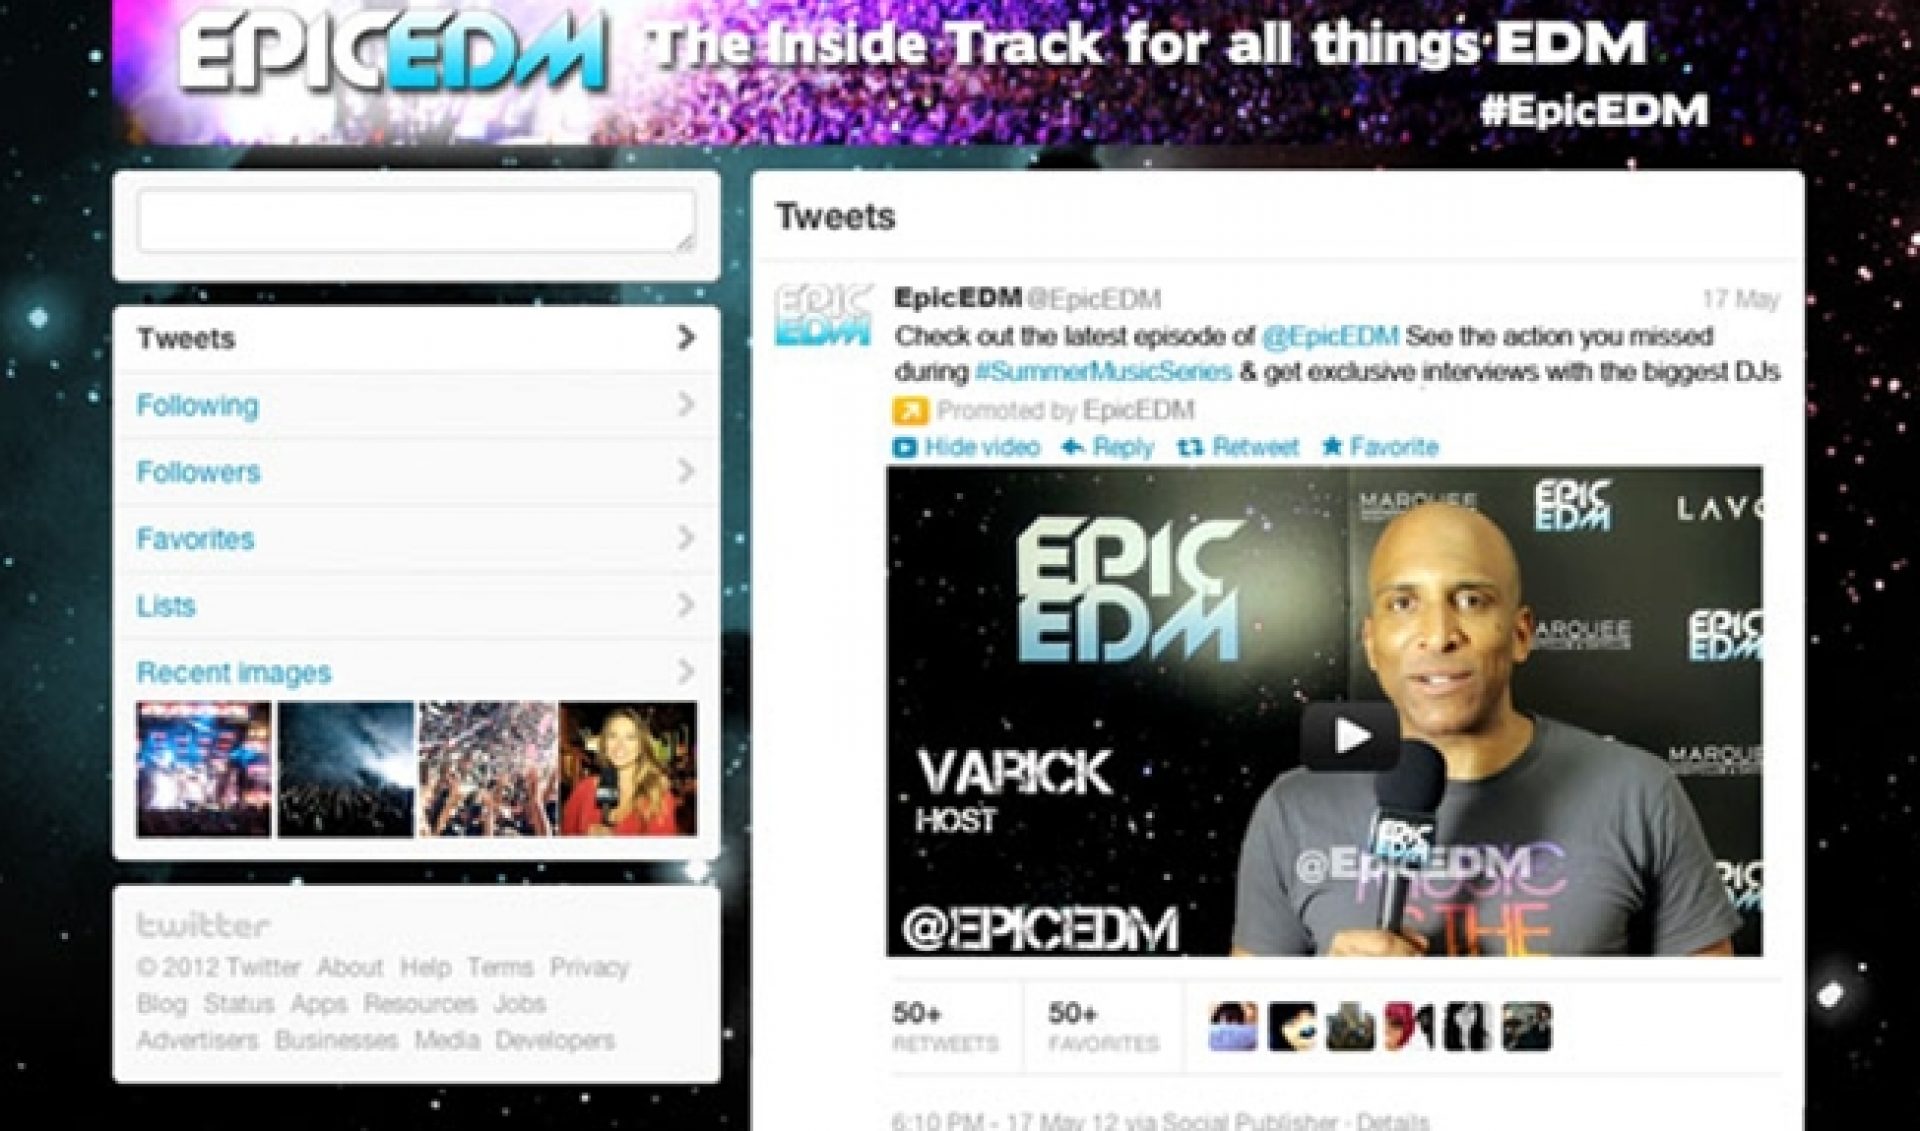 Music Show EpicEDM To Be First Original Series Exclusive To Twitter